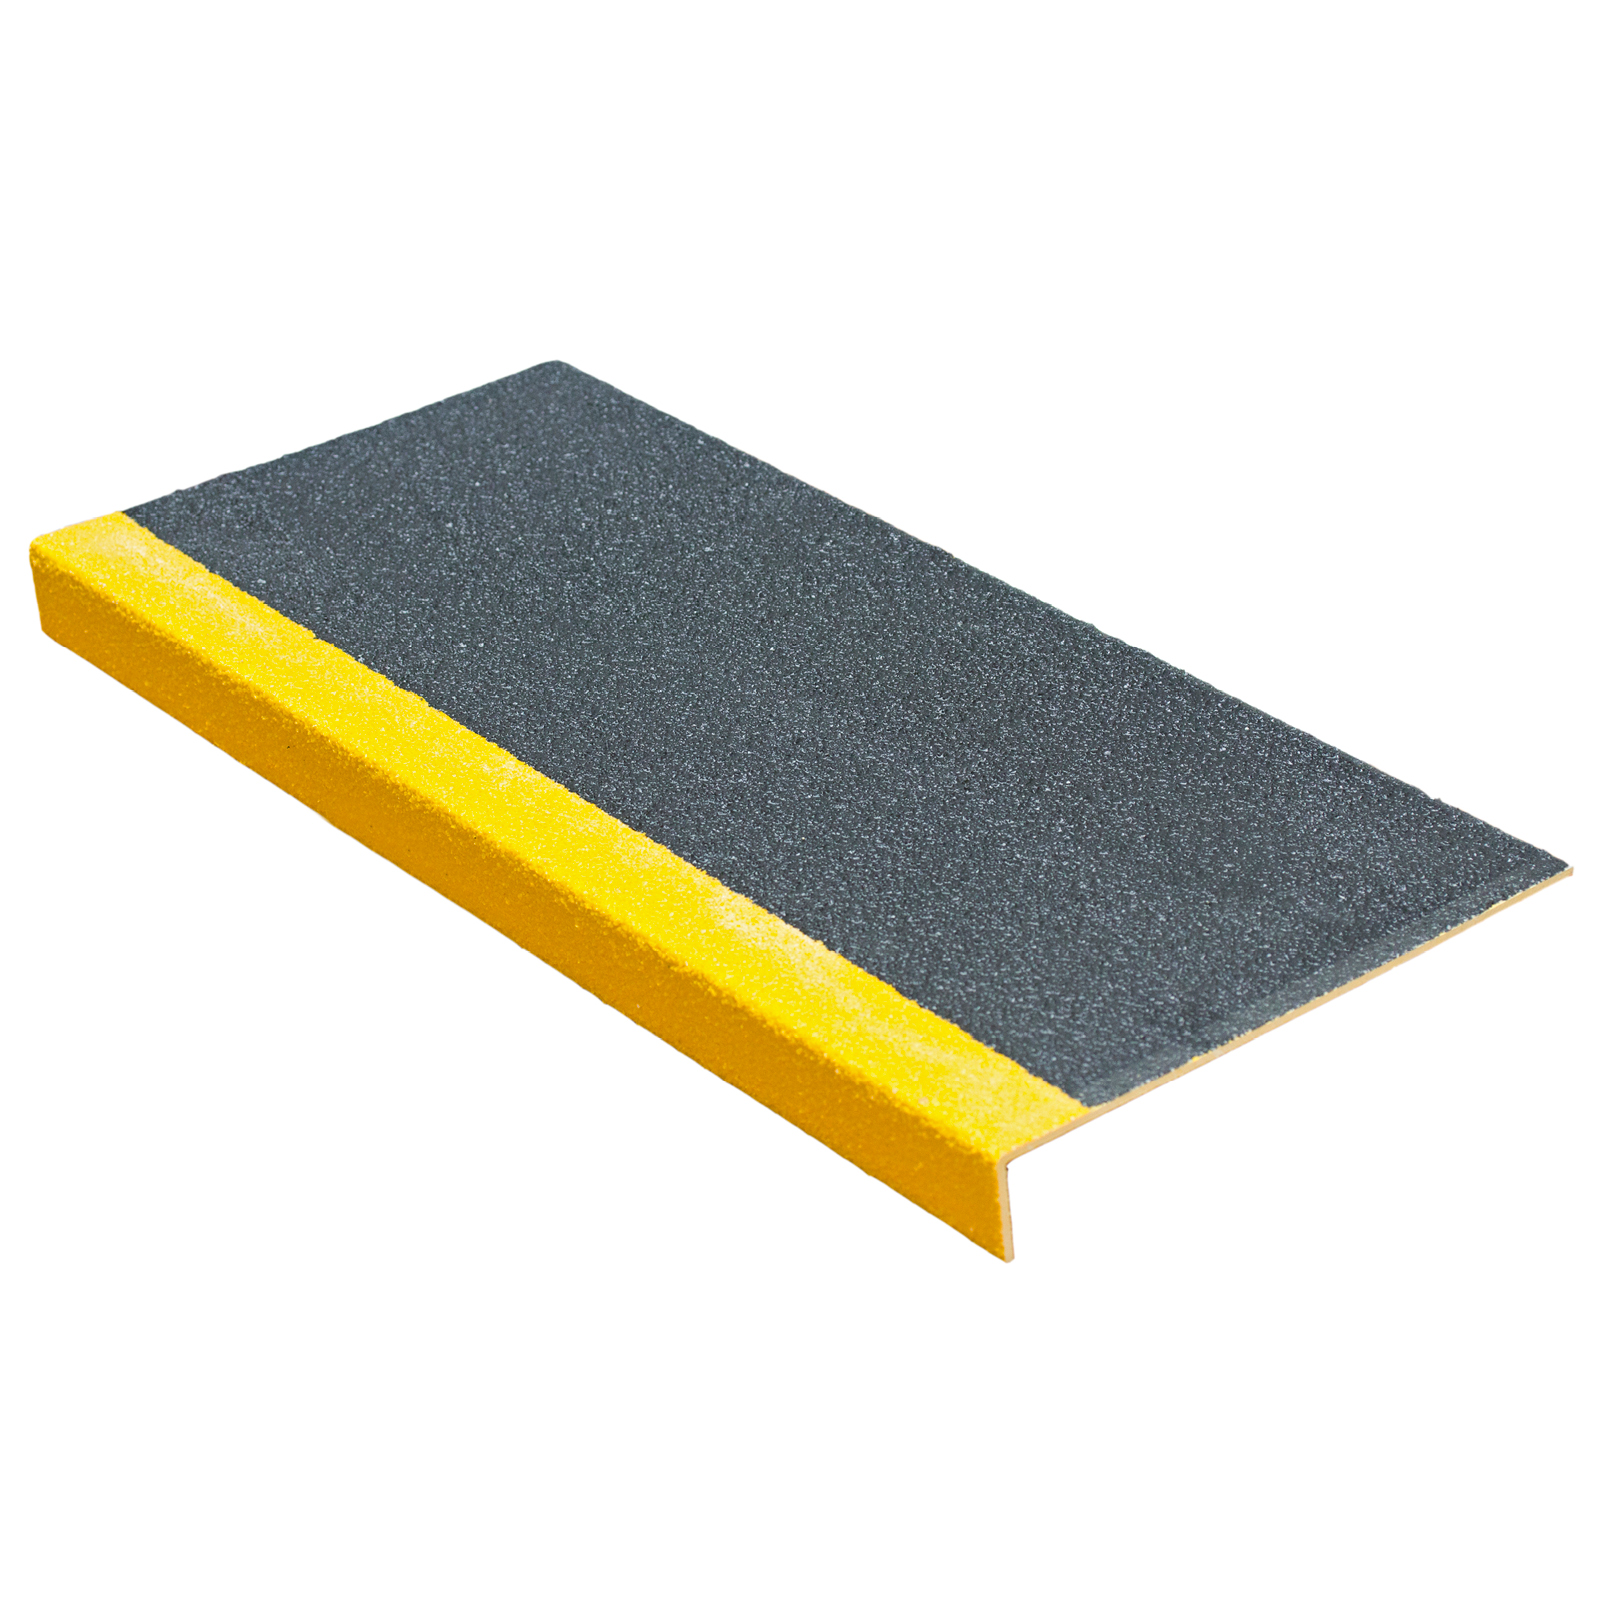 Stair Safety Products Stair Tread Cover